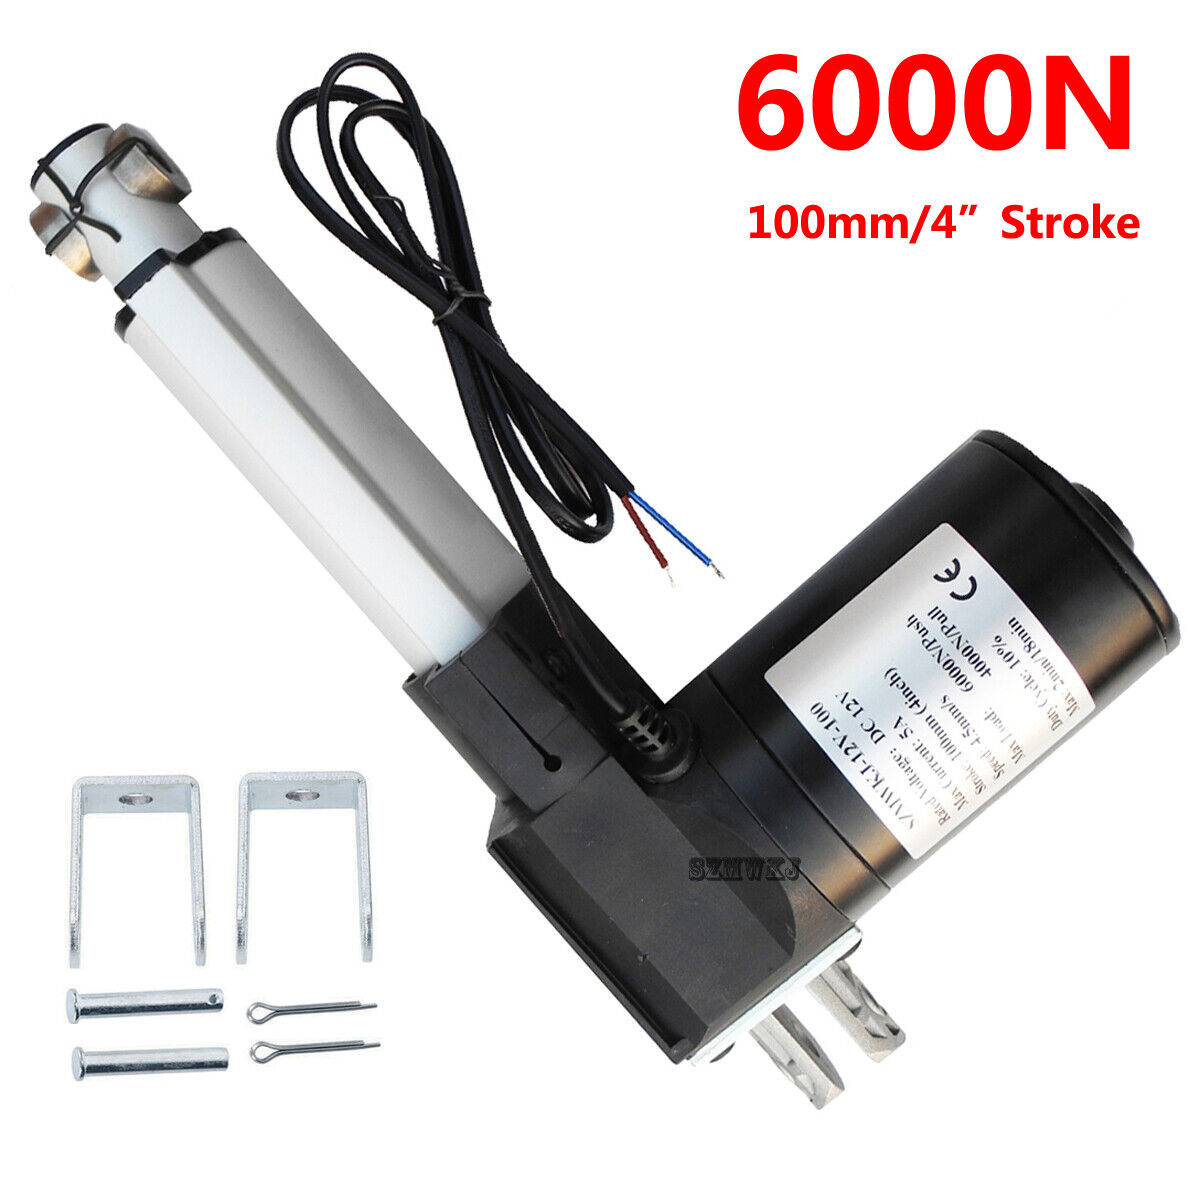 Linear Actuator 12V Electric Motor 6000N Max Lift IP54 Water-proof Heavy Duty CL